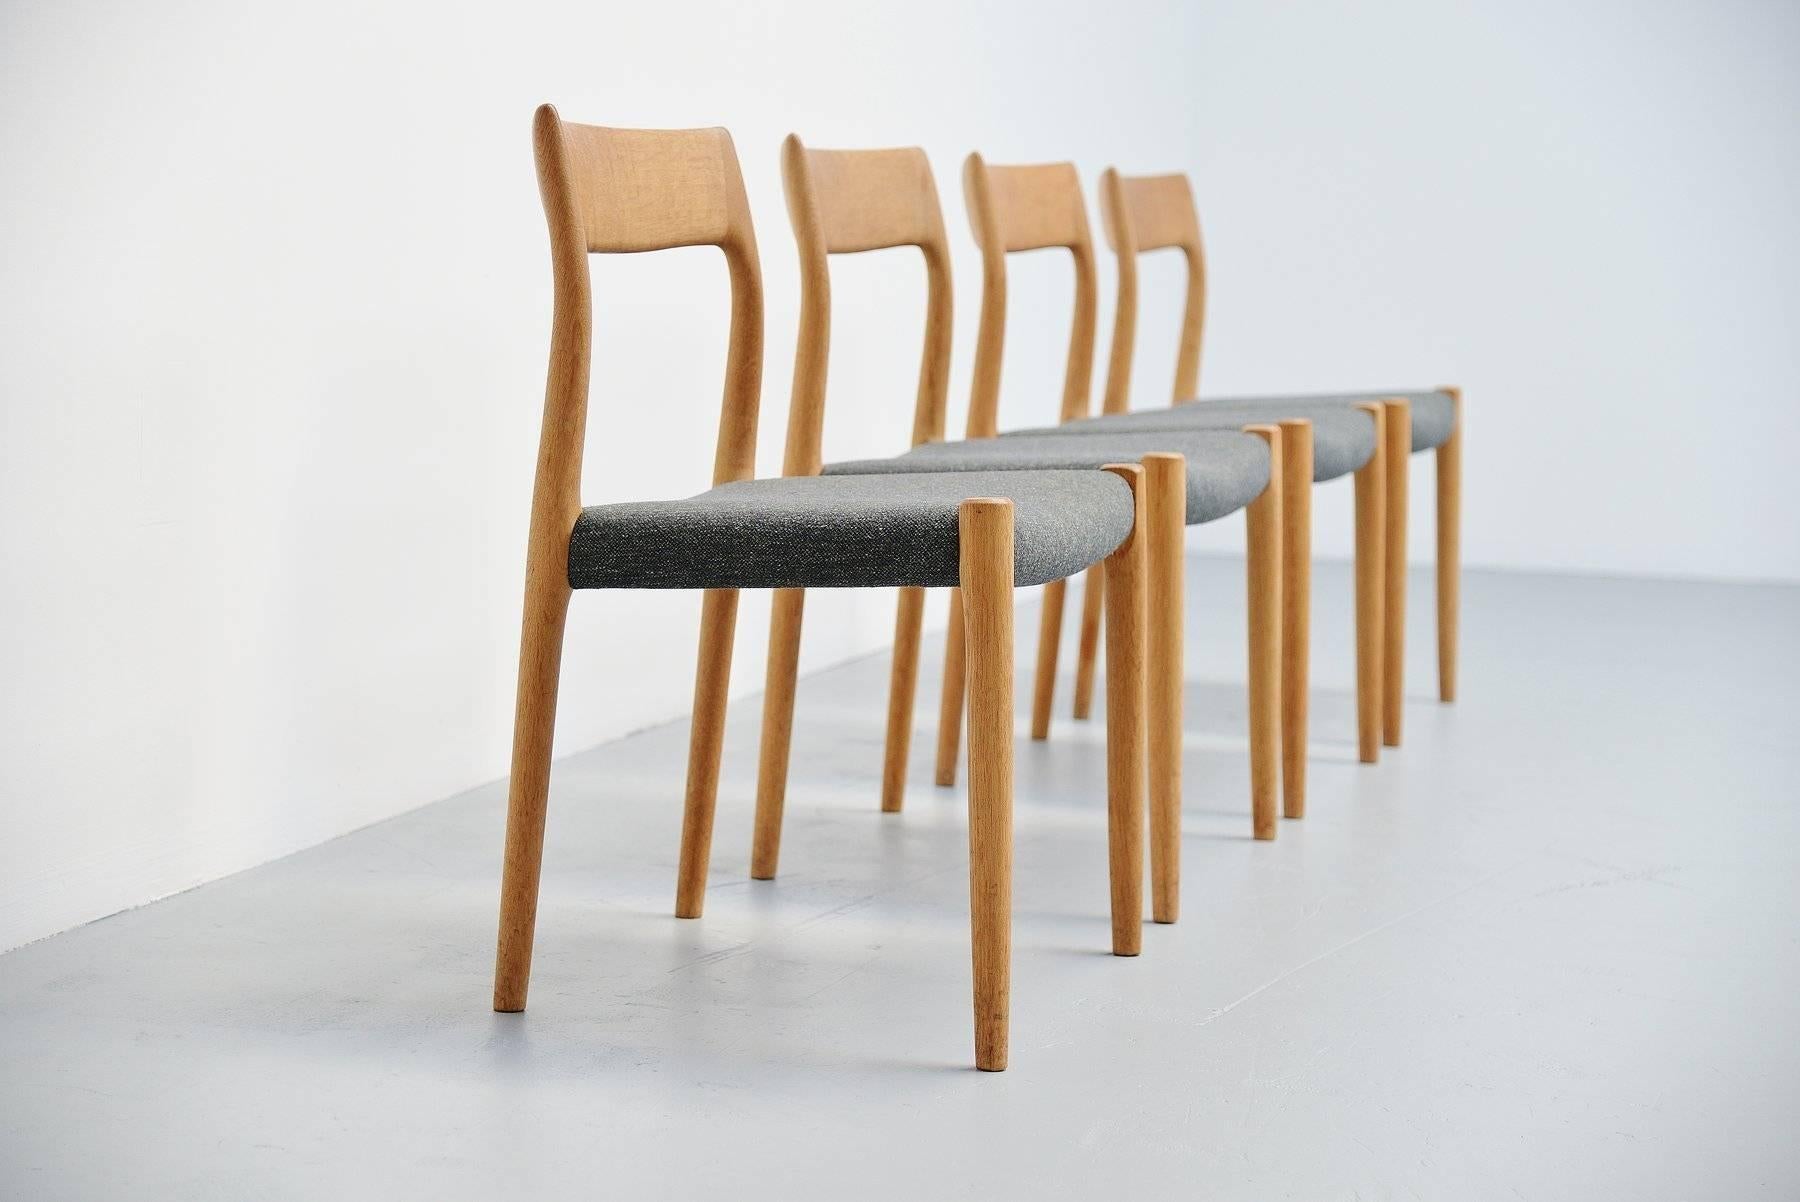 Very nice set of four dining chairs model 77 designed by Niels Moller for J.L. Møller Mobelfabrik, Denmark, 1959. These chairs are made of solid oak wood and have new dark grey upholstery that is really nice in contrast with the light oak wooden